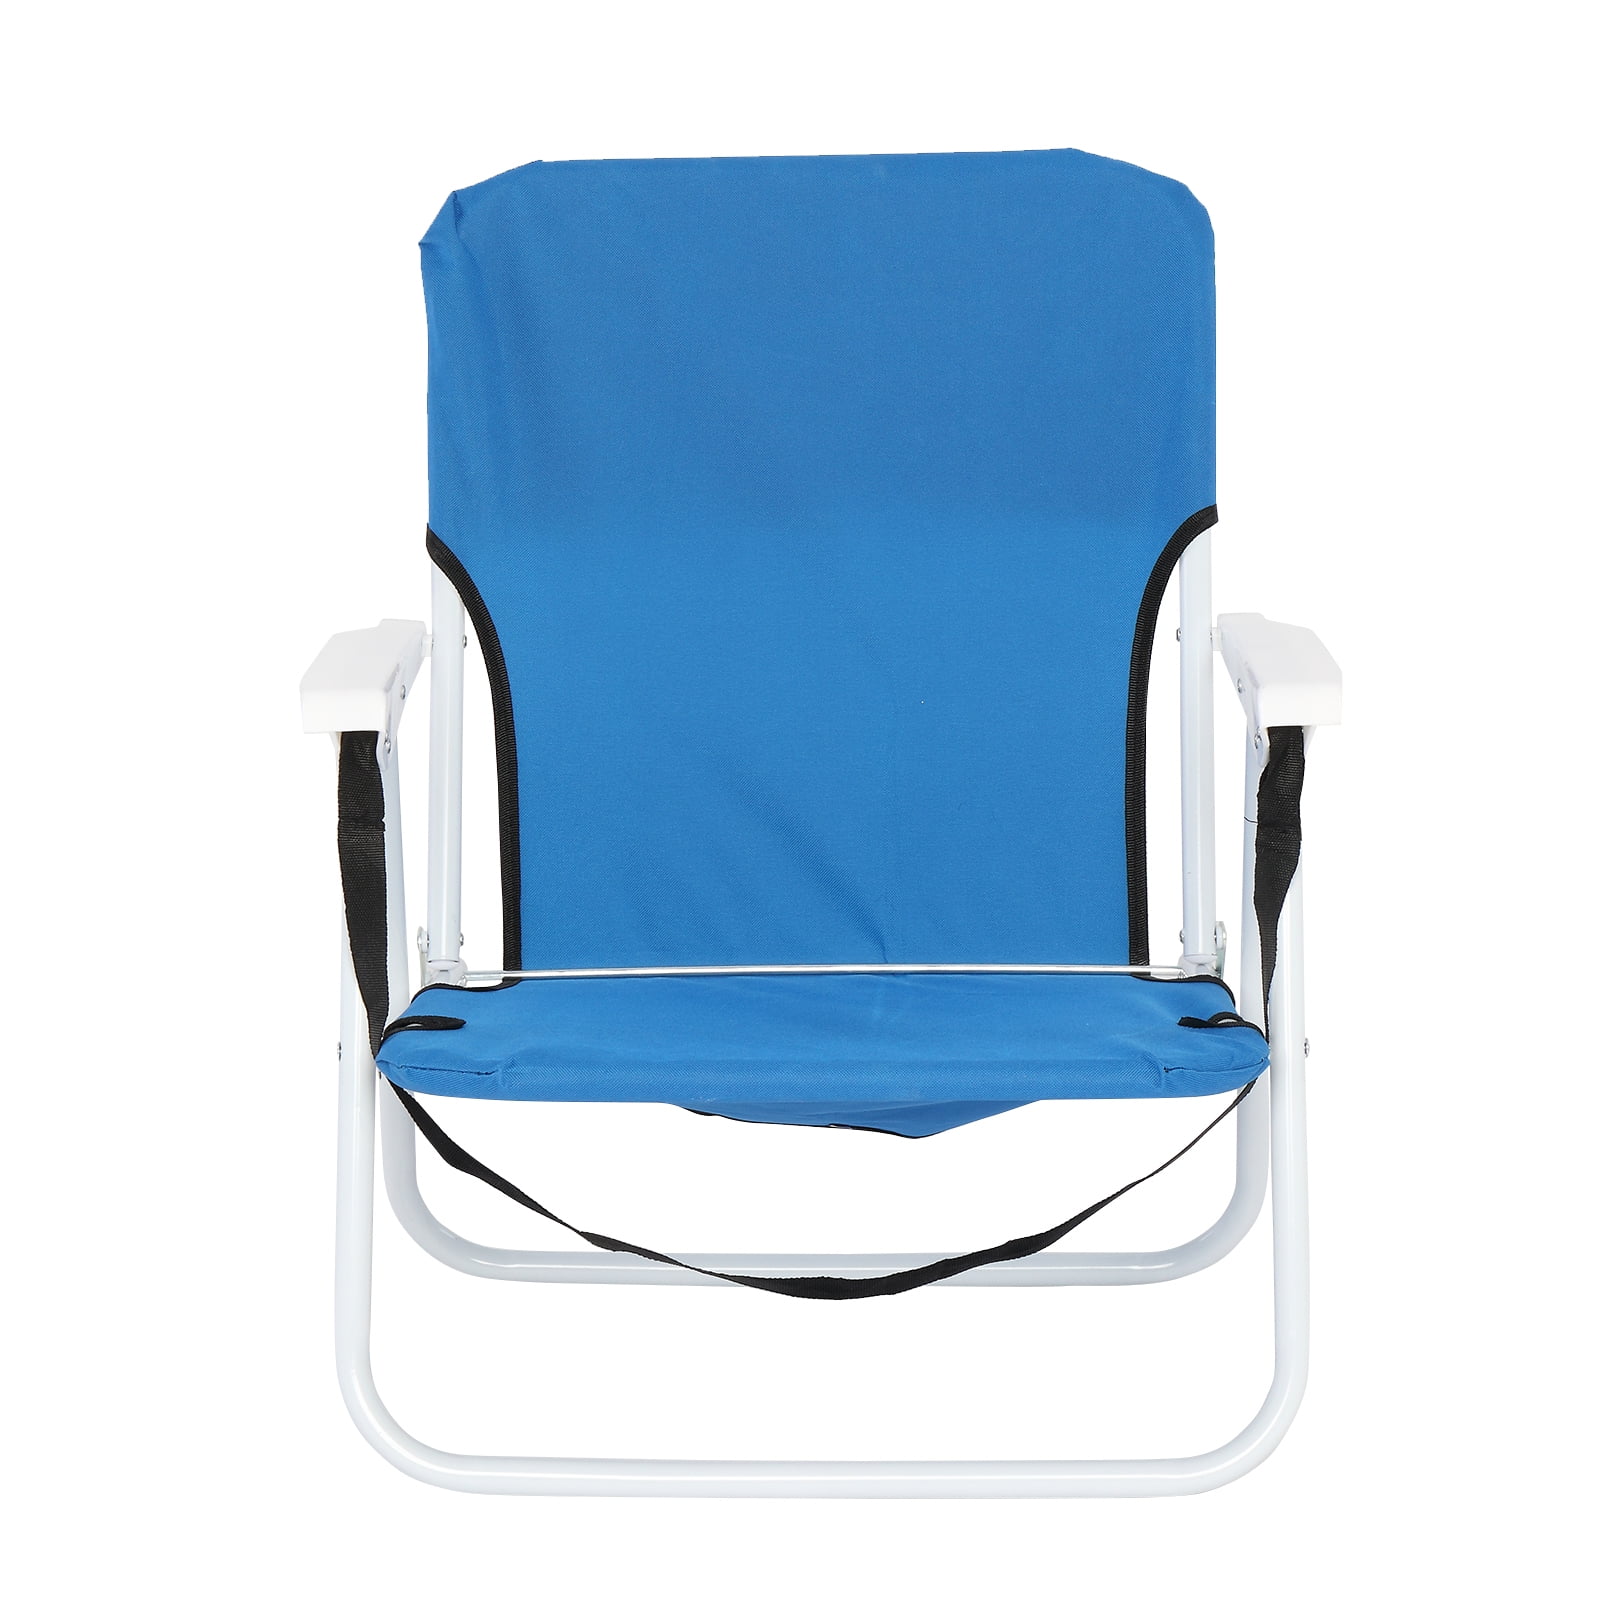 Canddidliike Oxford Cloth Iron Folding Camping Chairs for Outdoor Beach - Blue